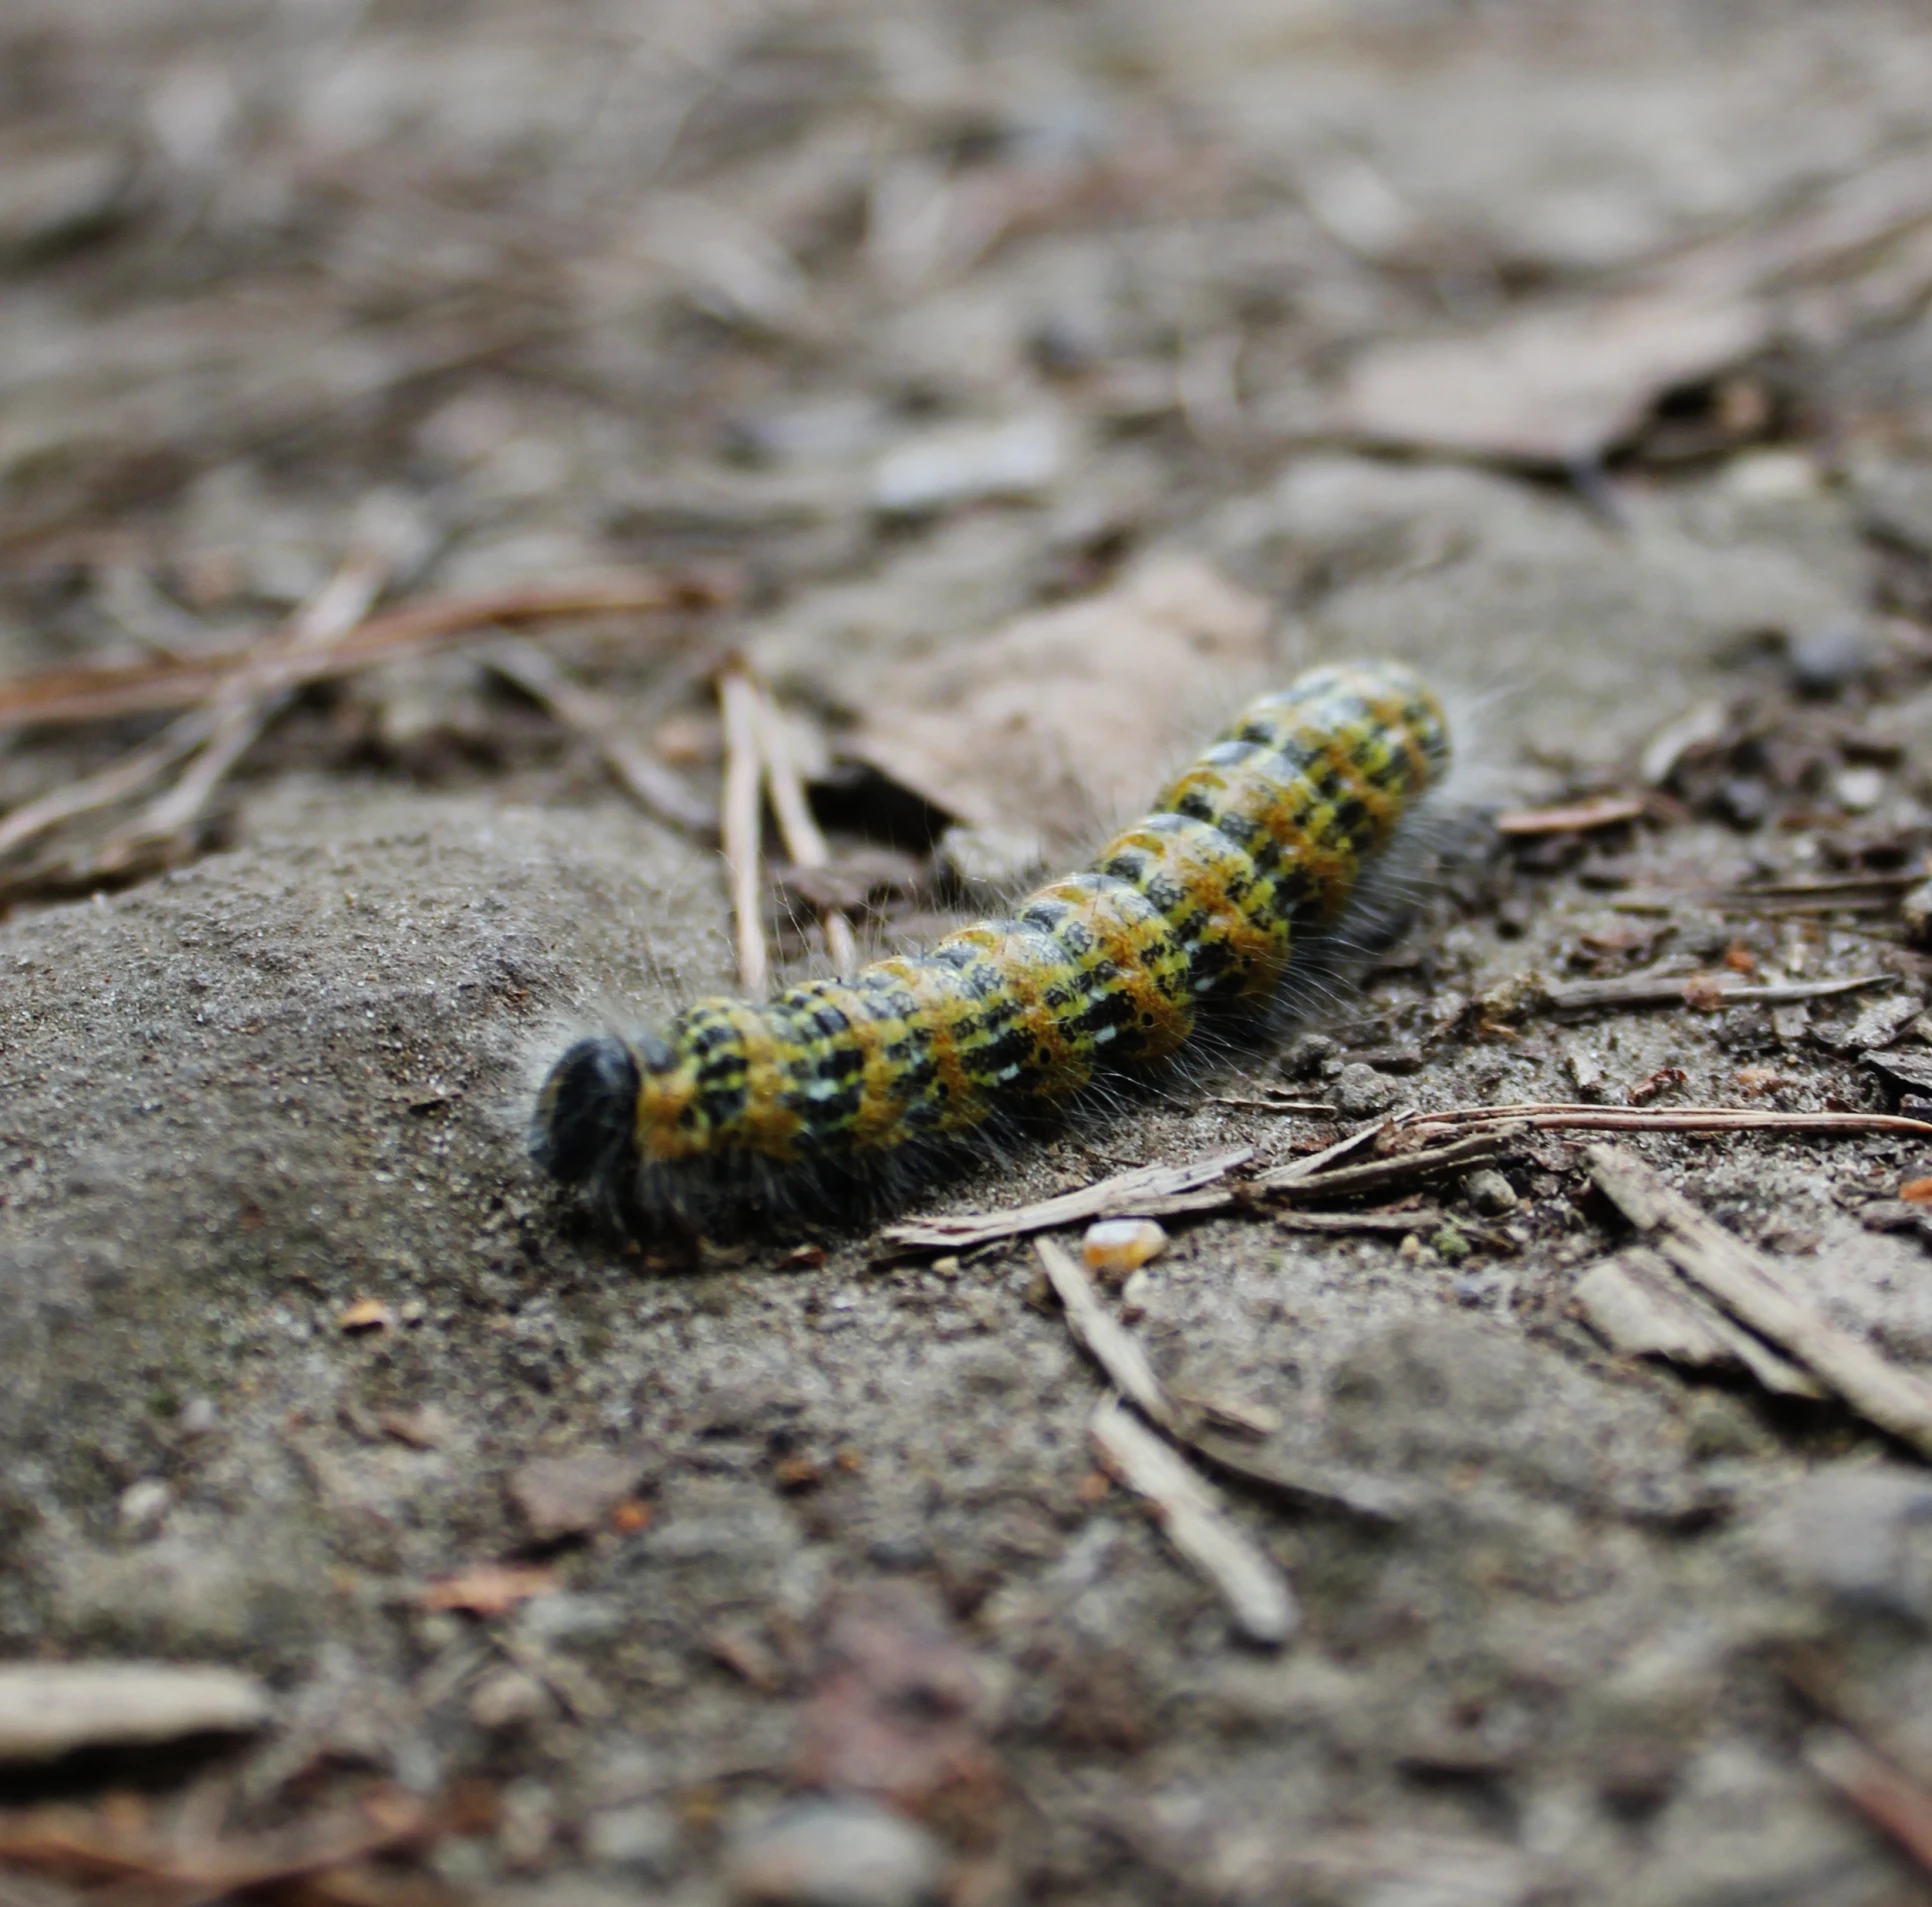 there is a green and black caterpillar crawling on the ground